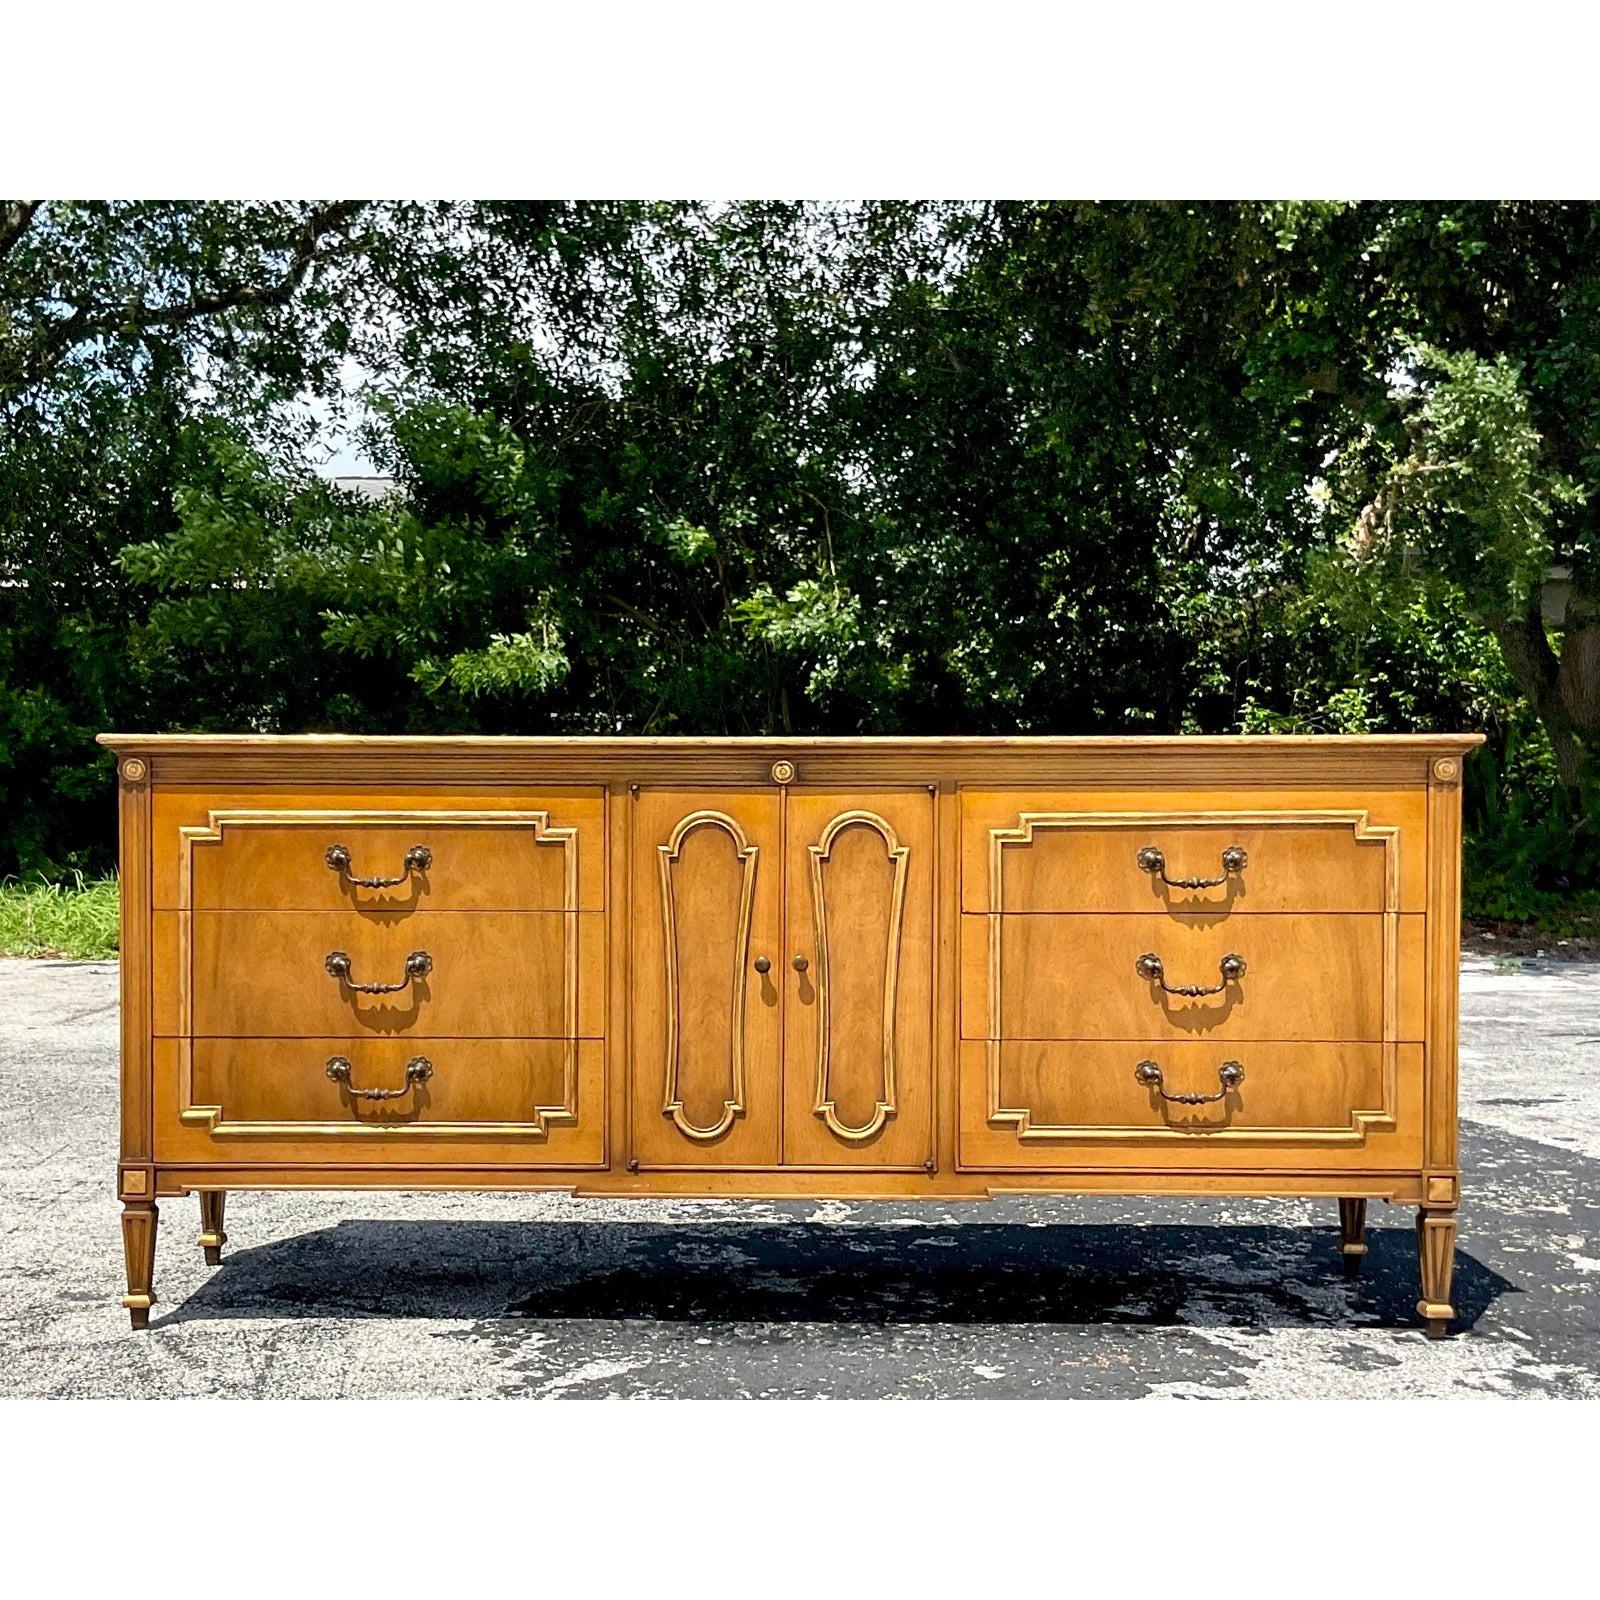 A sensational vintage MCM credenza. Made by the iconic John Widdicomb and tagged inside the drawer. Gorgeous gilt tipped detail and brass hardware. Acquired from a Palm Beach estate